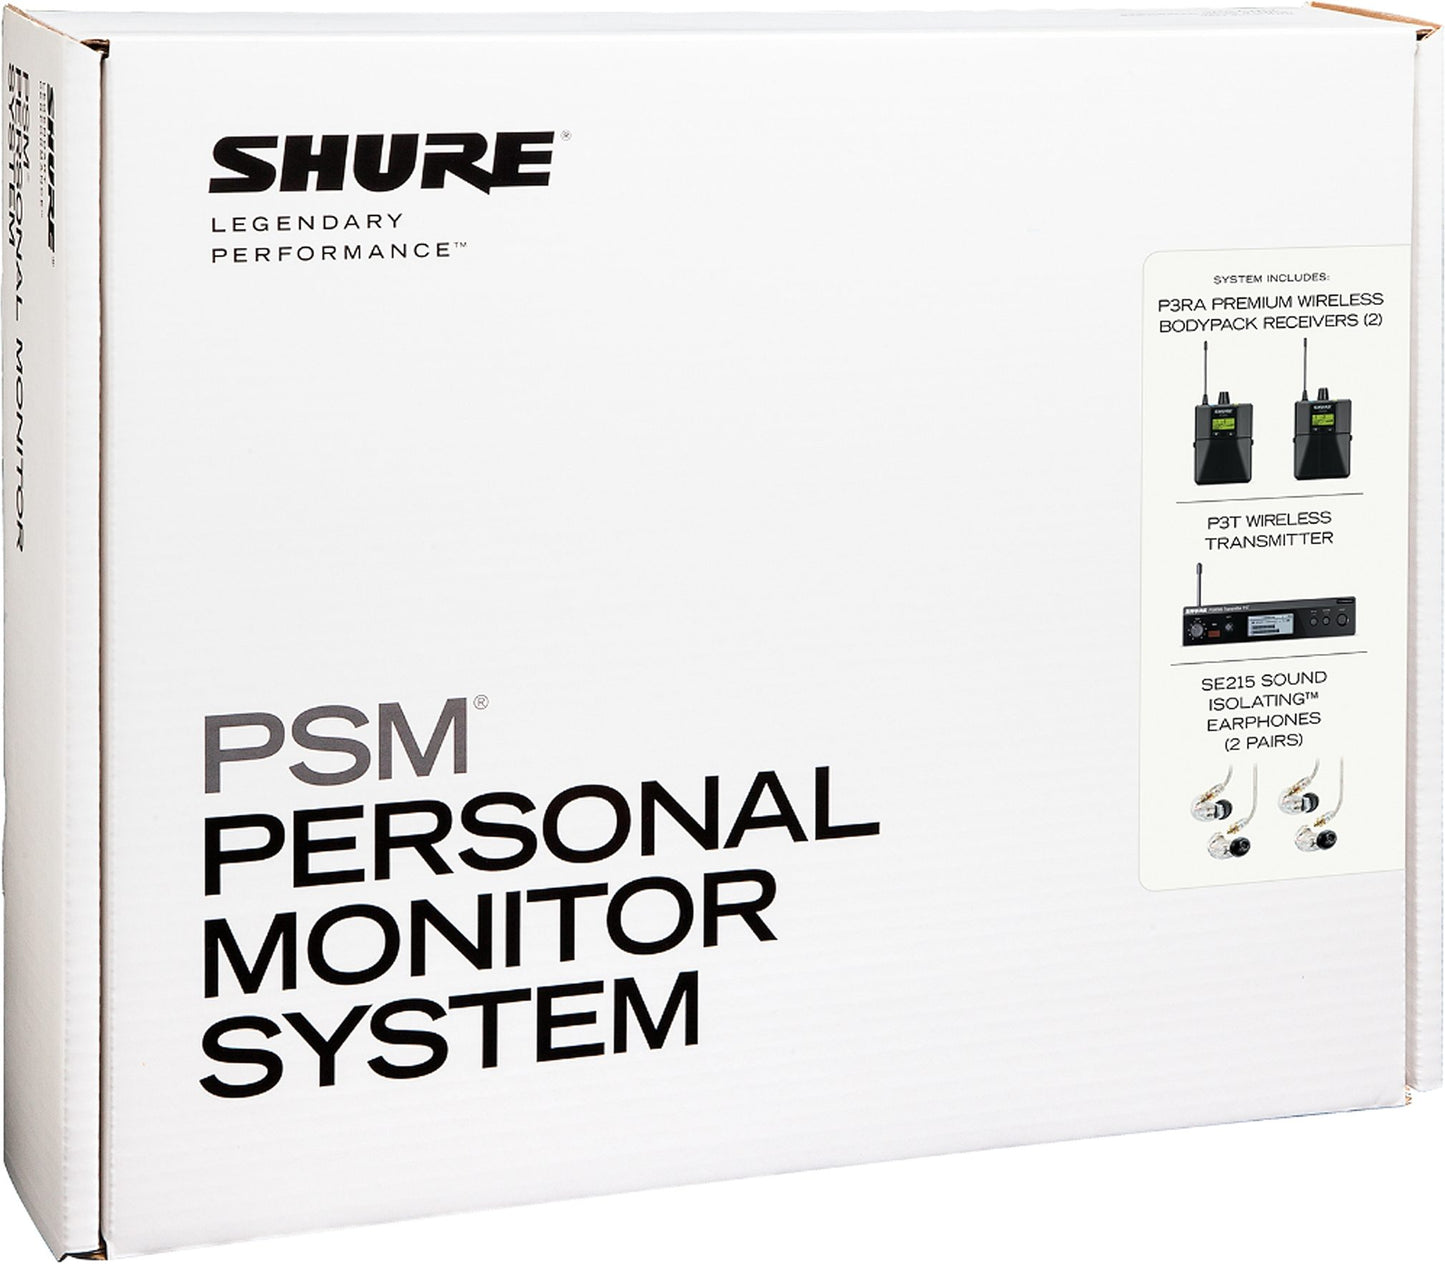 Shure PSM 300 Twin Pack PRO Wireless In-Ear Monitor IEM System with SE215 Earphones, Band G20